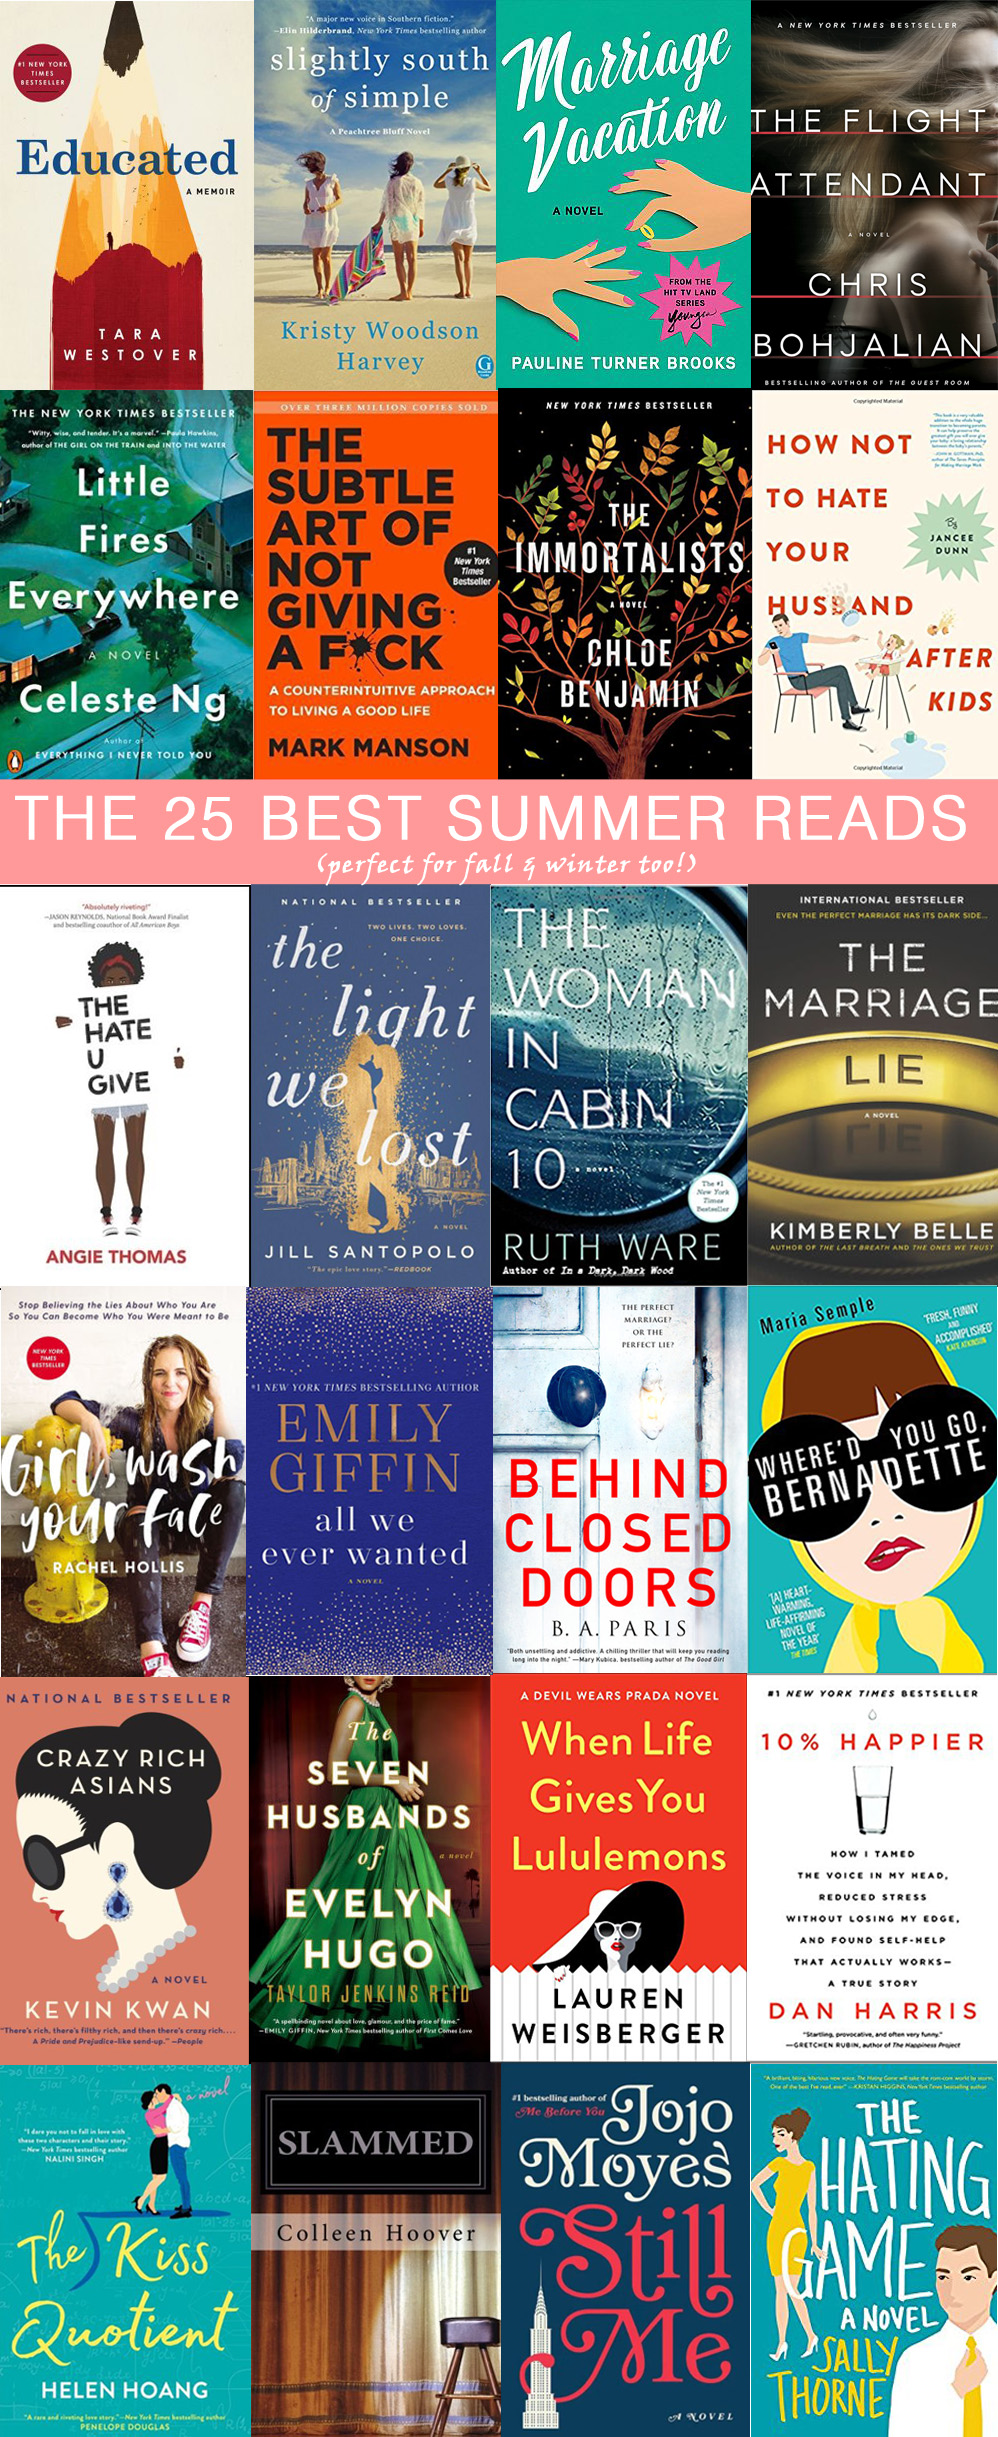 The 25 Best Books to Read this Summer (and into the fall, too!) // the modern savvy, a life & style blog - The 25 Best Summer Reads featured by popular Florida lifestyle blogger, The Modern Savvy